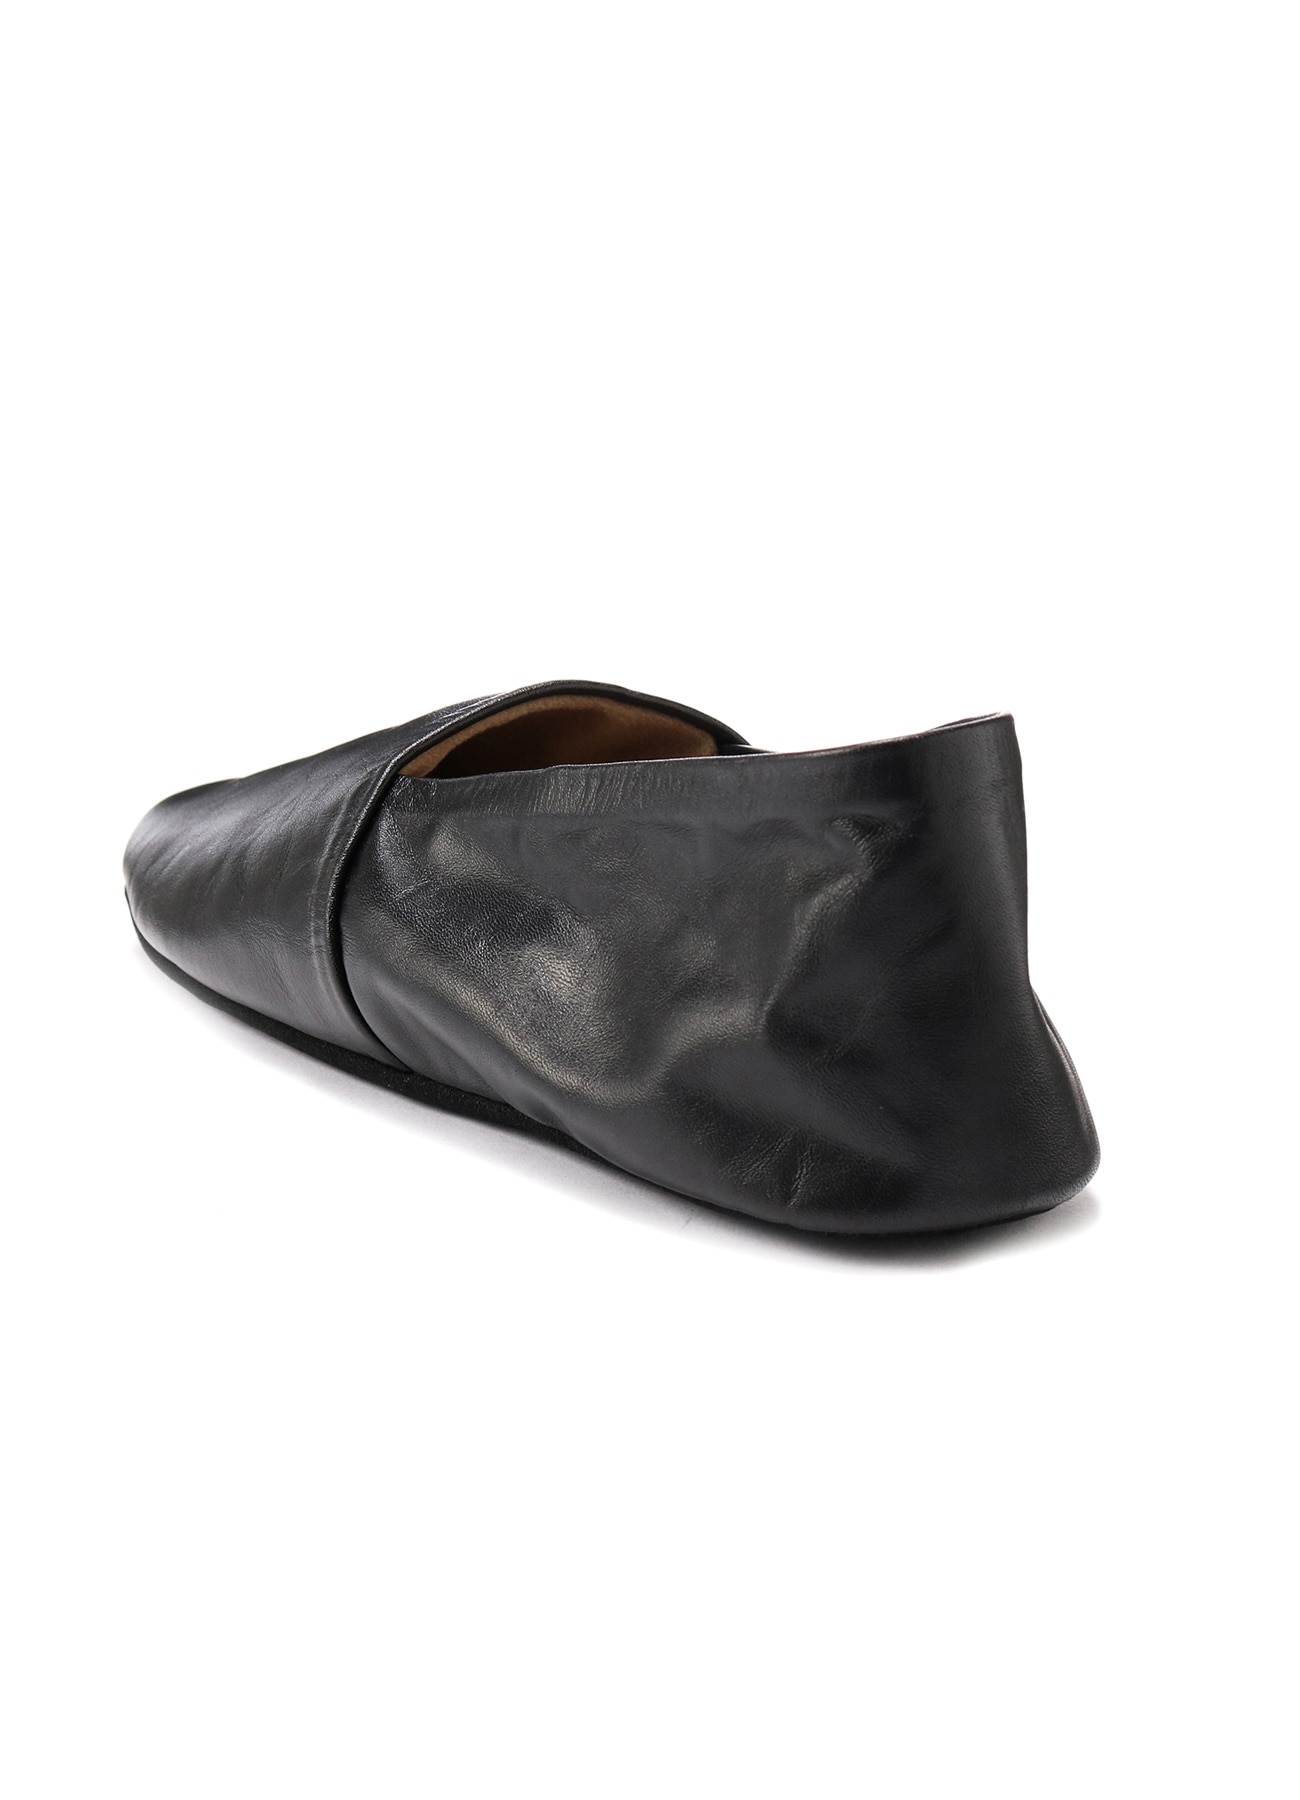 LEATHER SLIPPERS